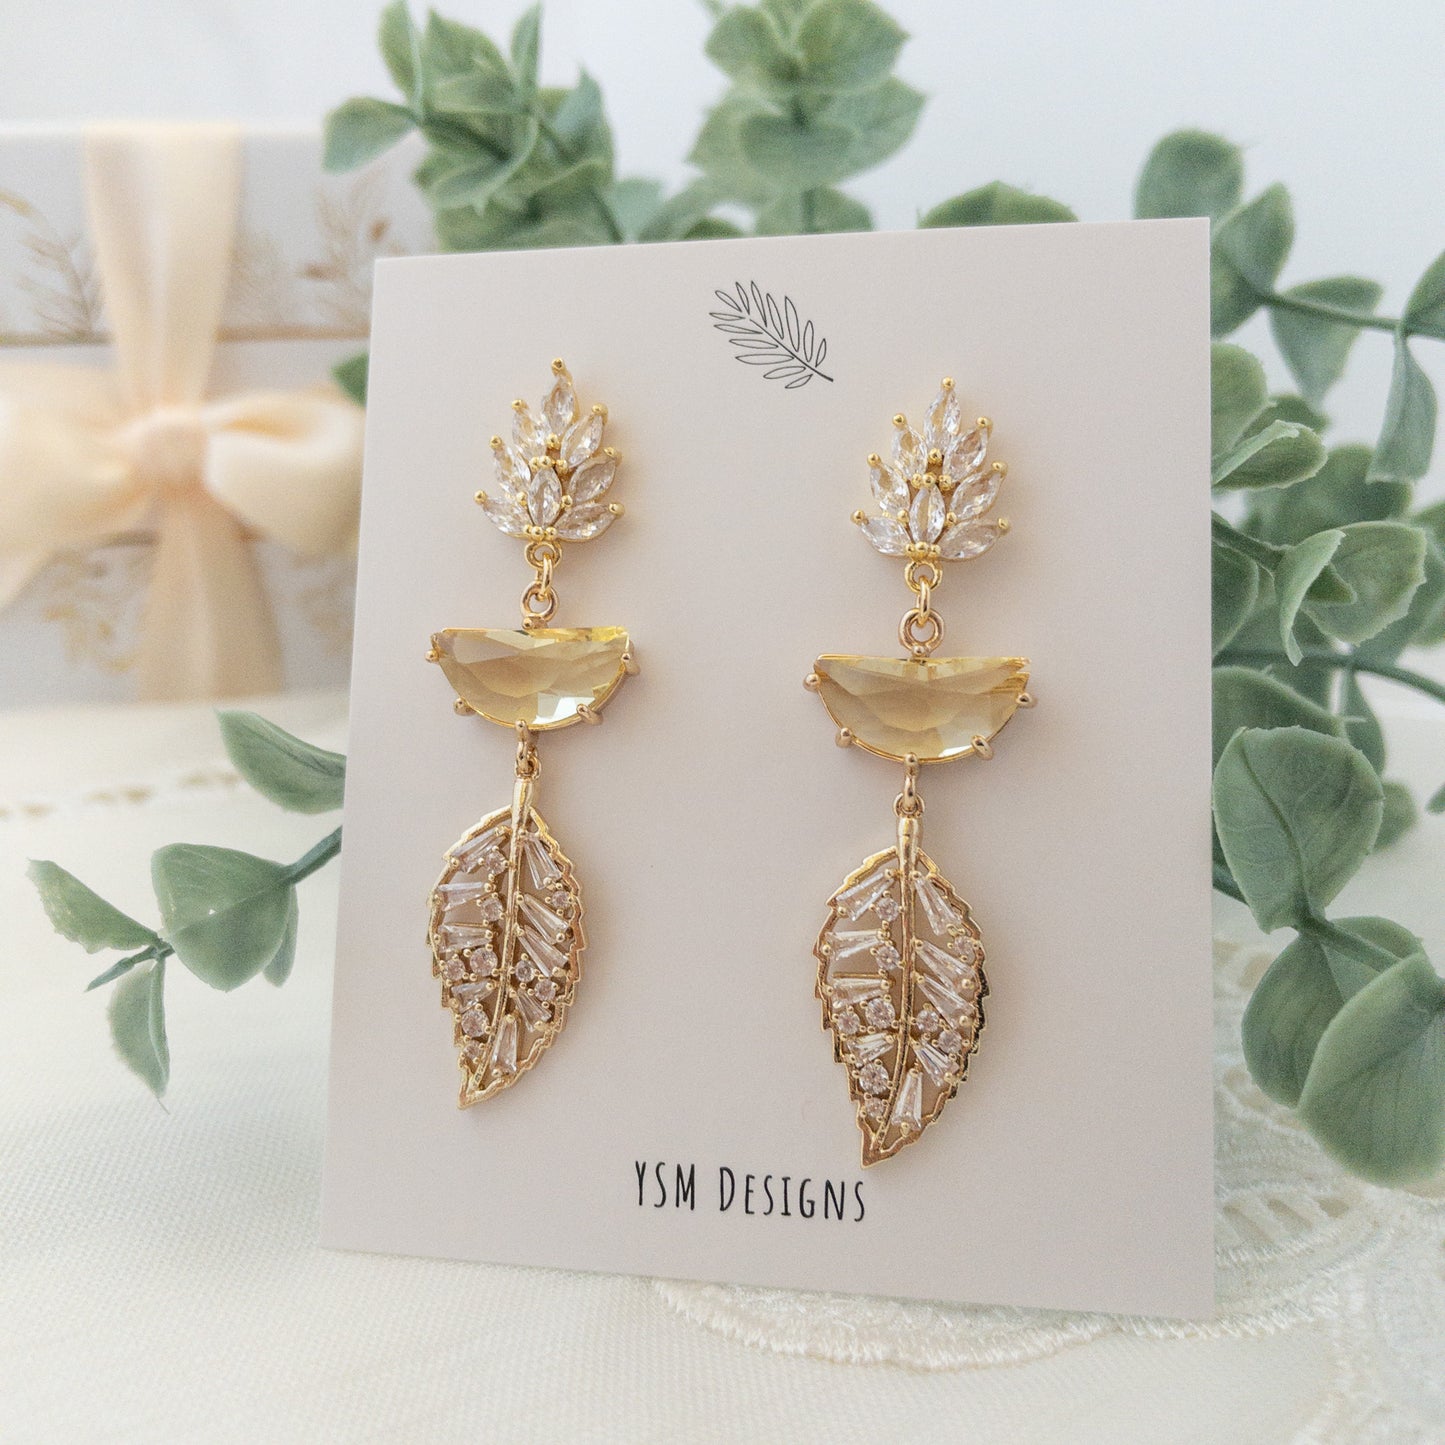 Leaf earrings with leaf crystal posts, yellow stones and leaf cyrstal dangles by YSM Designs